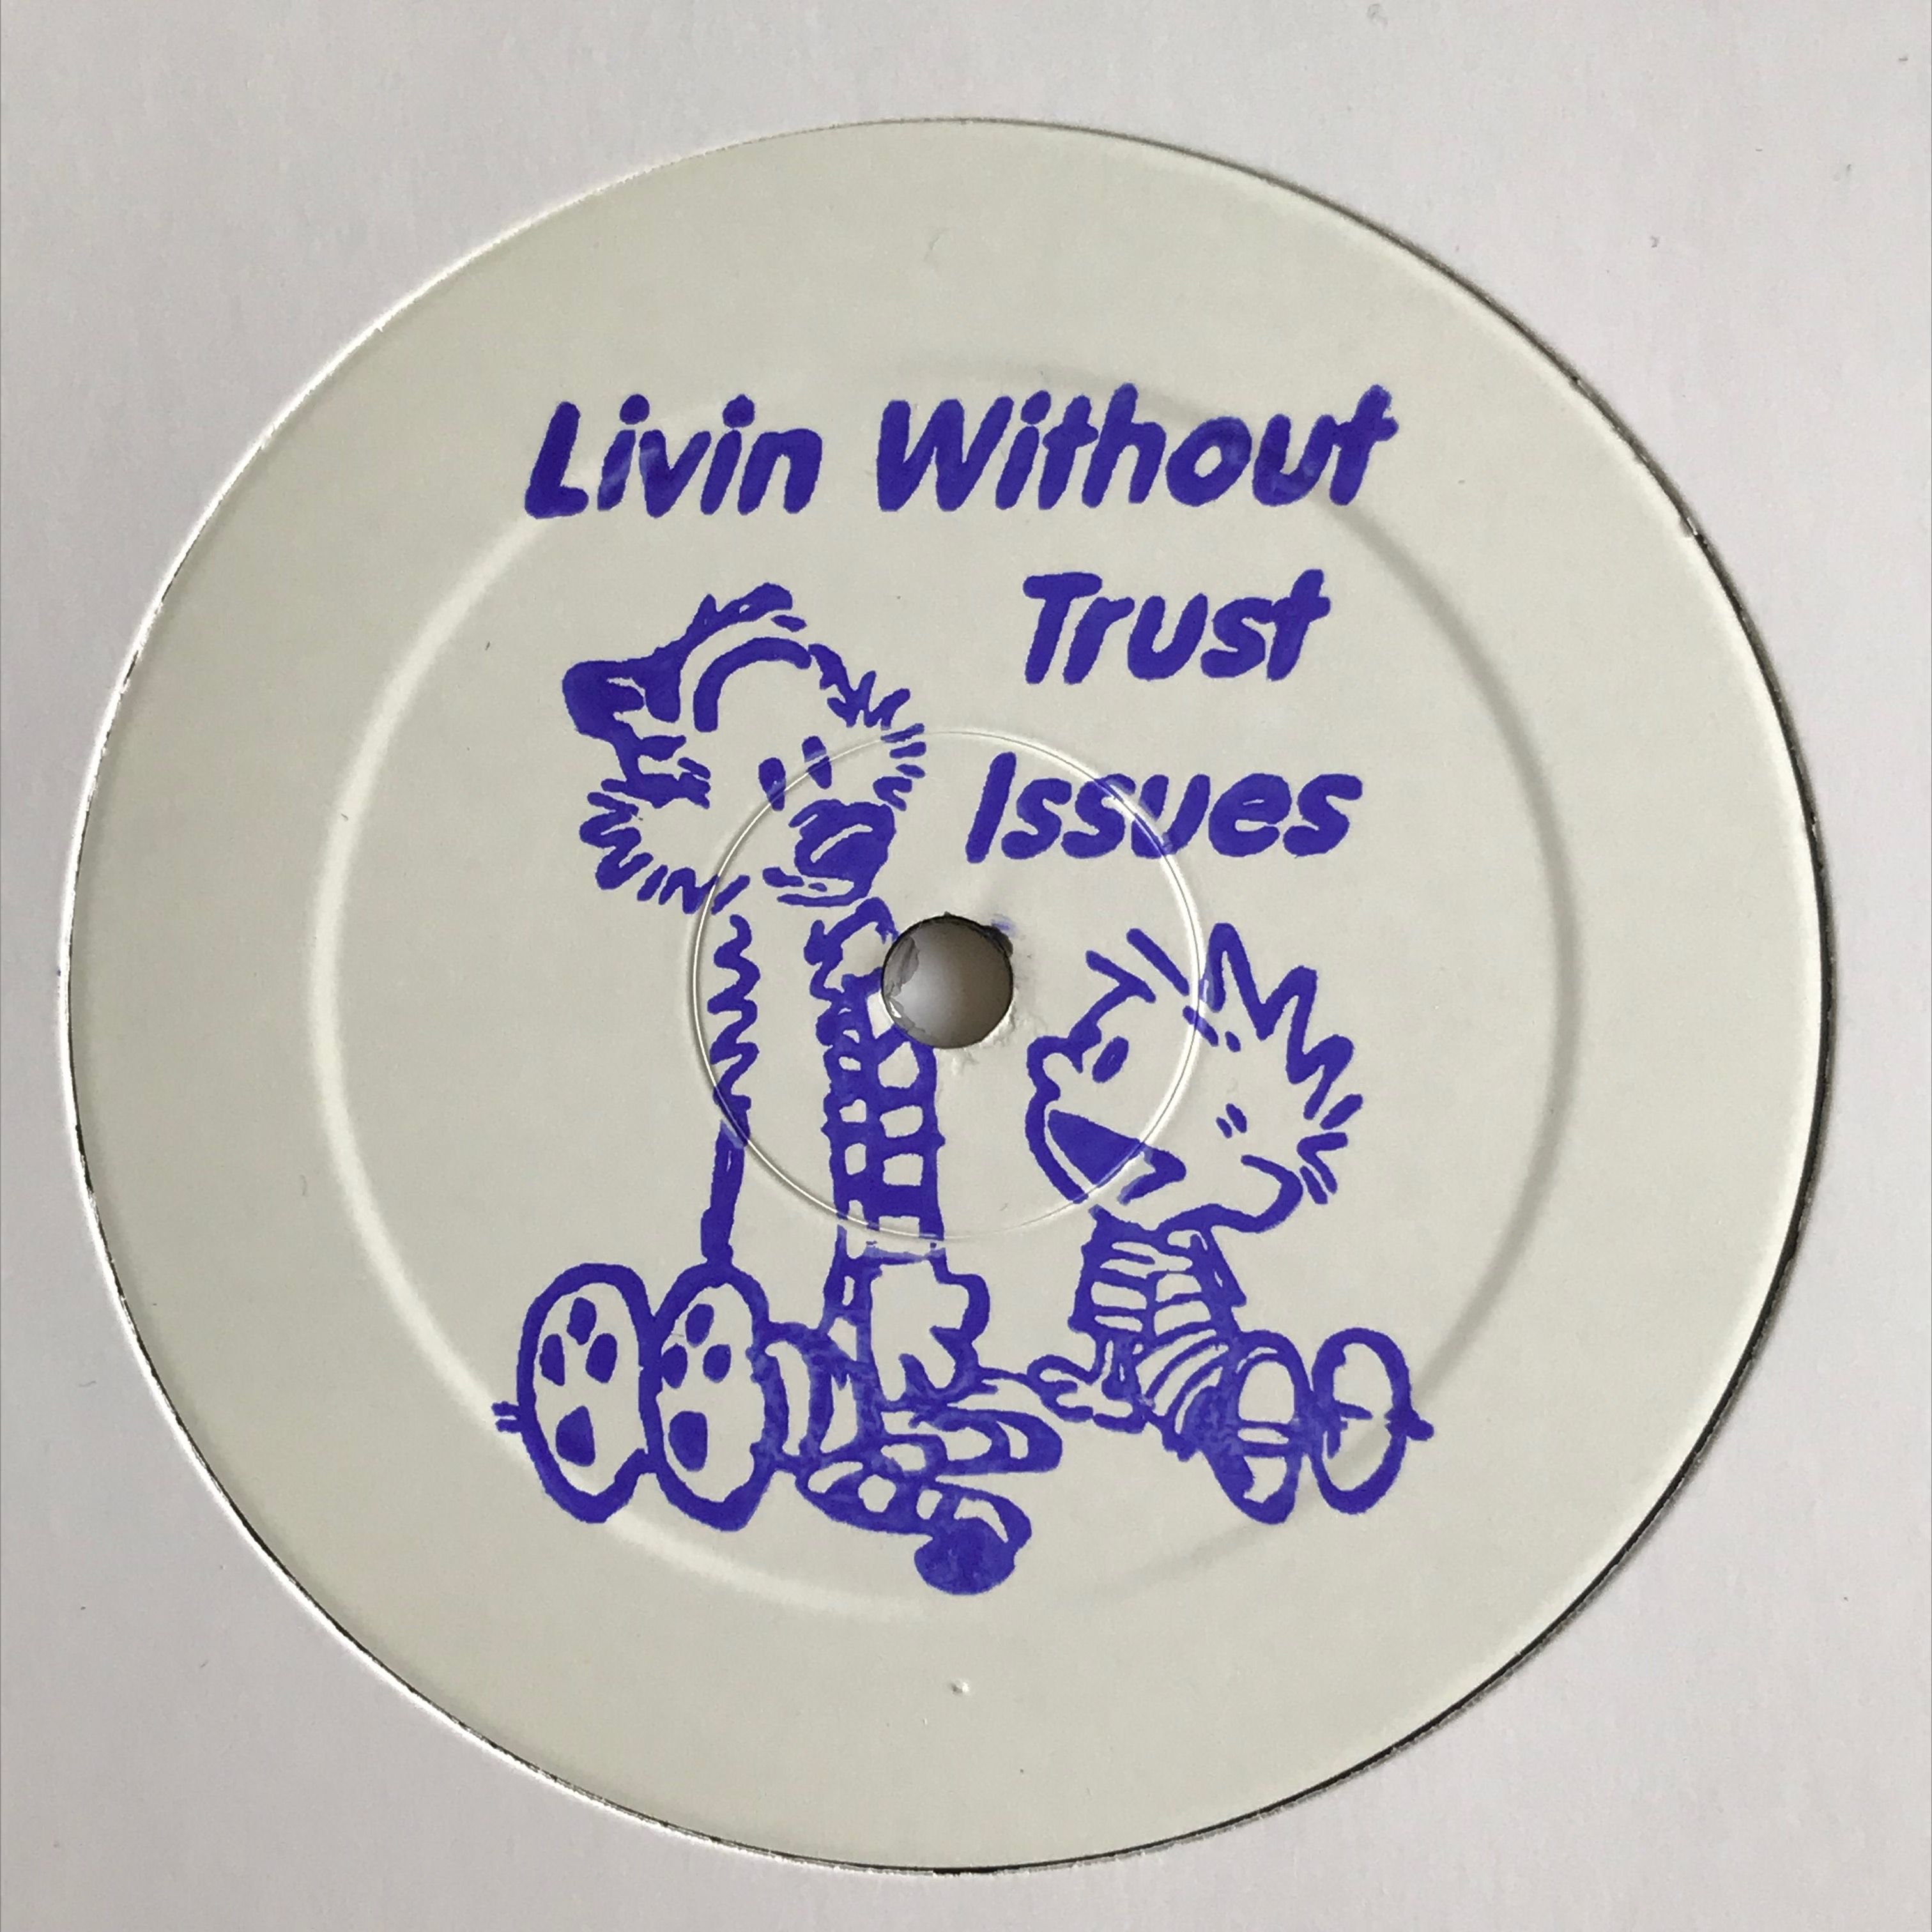 Percussive P/Coco Bryce - Livin Without Trust Issues - LUV03 - MYOR MASSIV